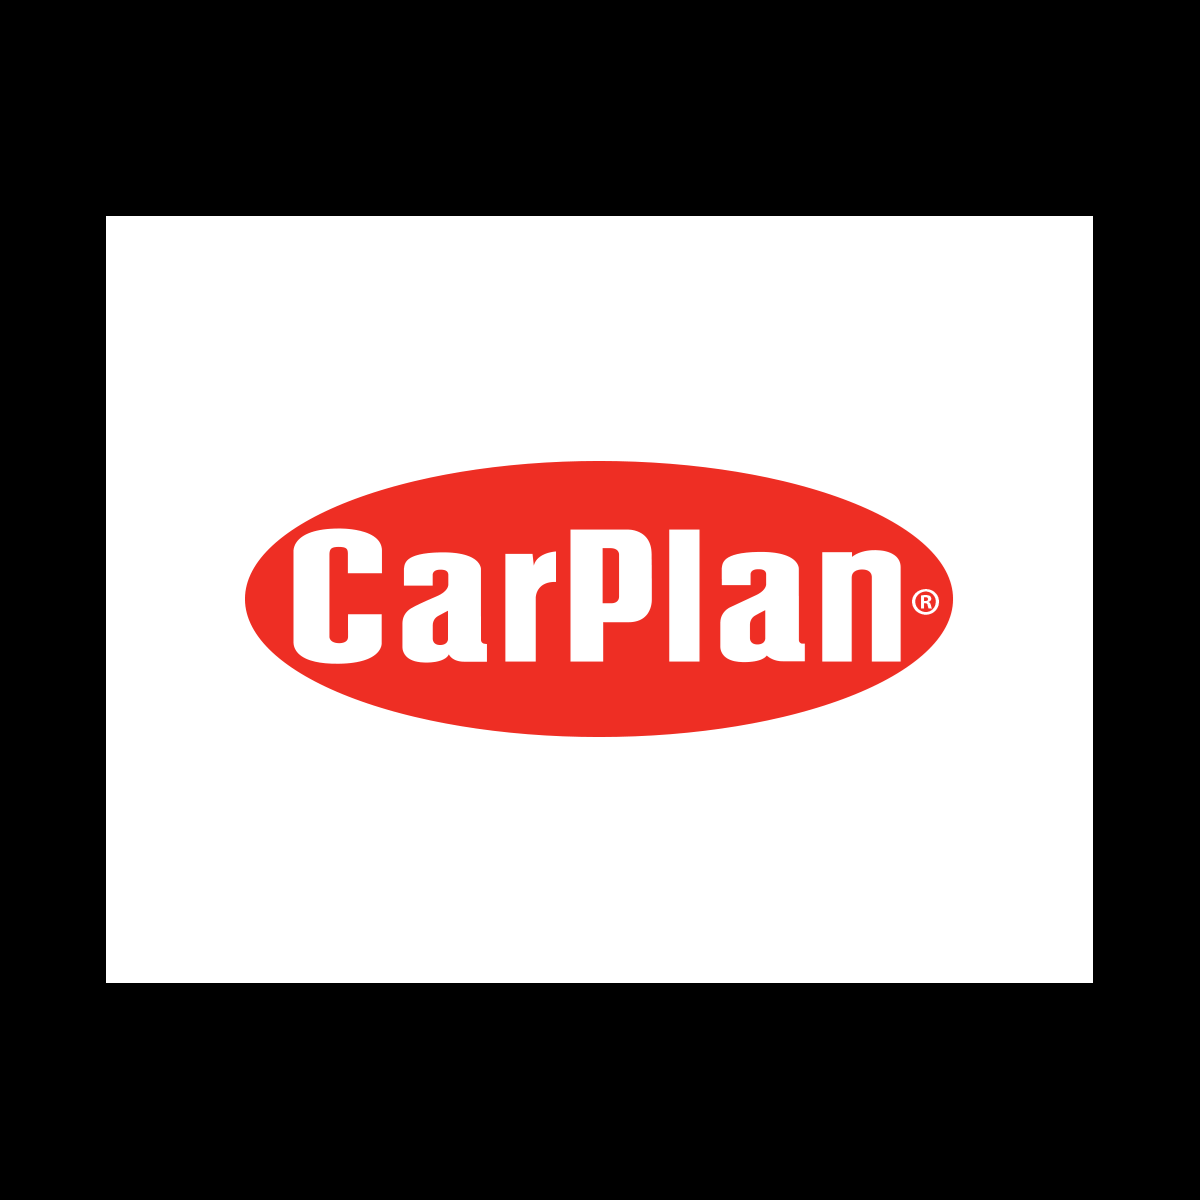 Where to Buy CarPlan Products